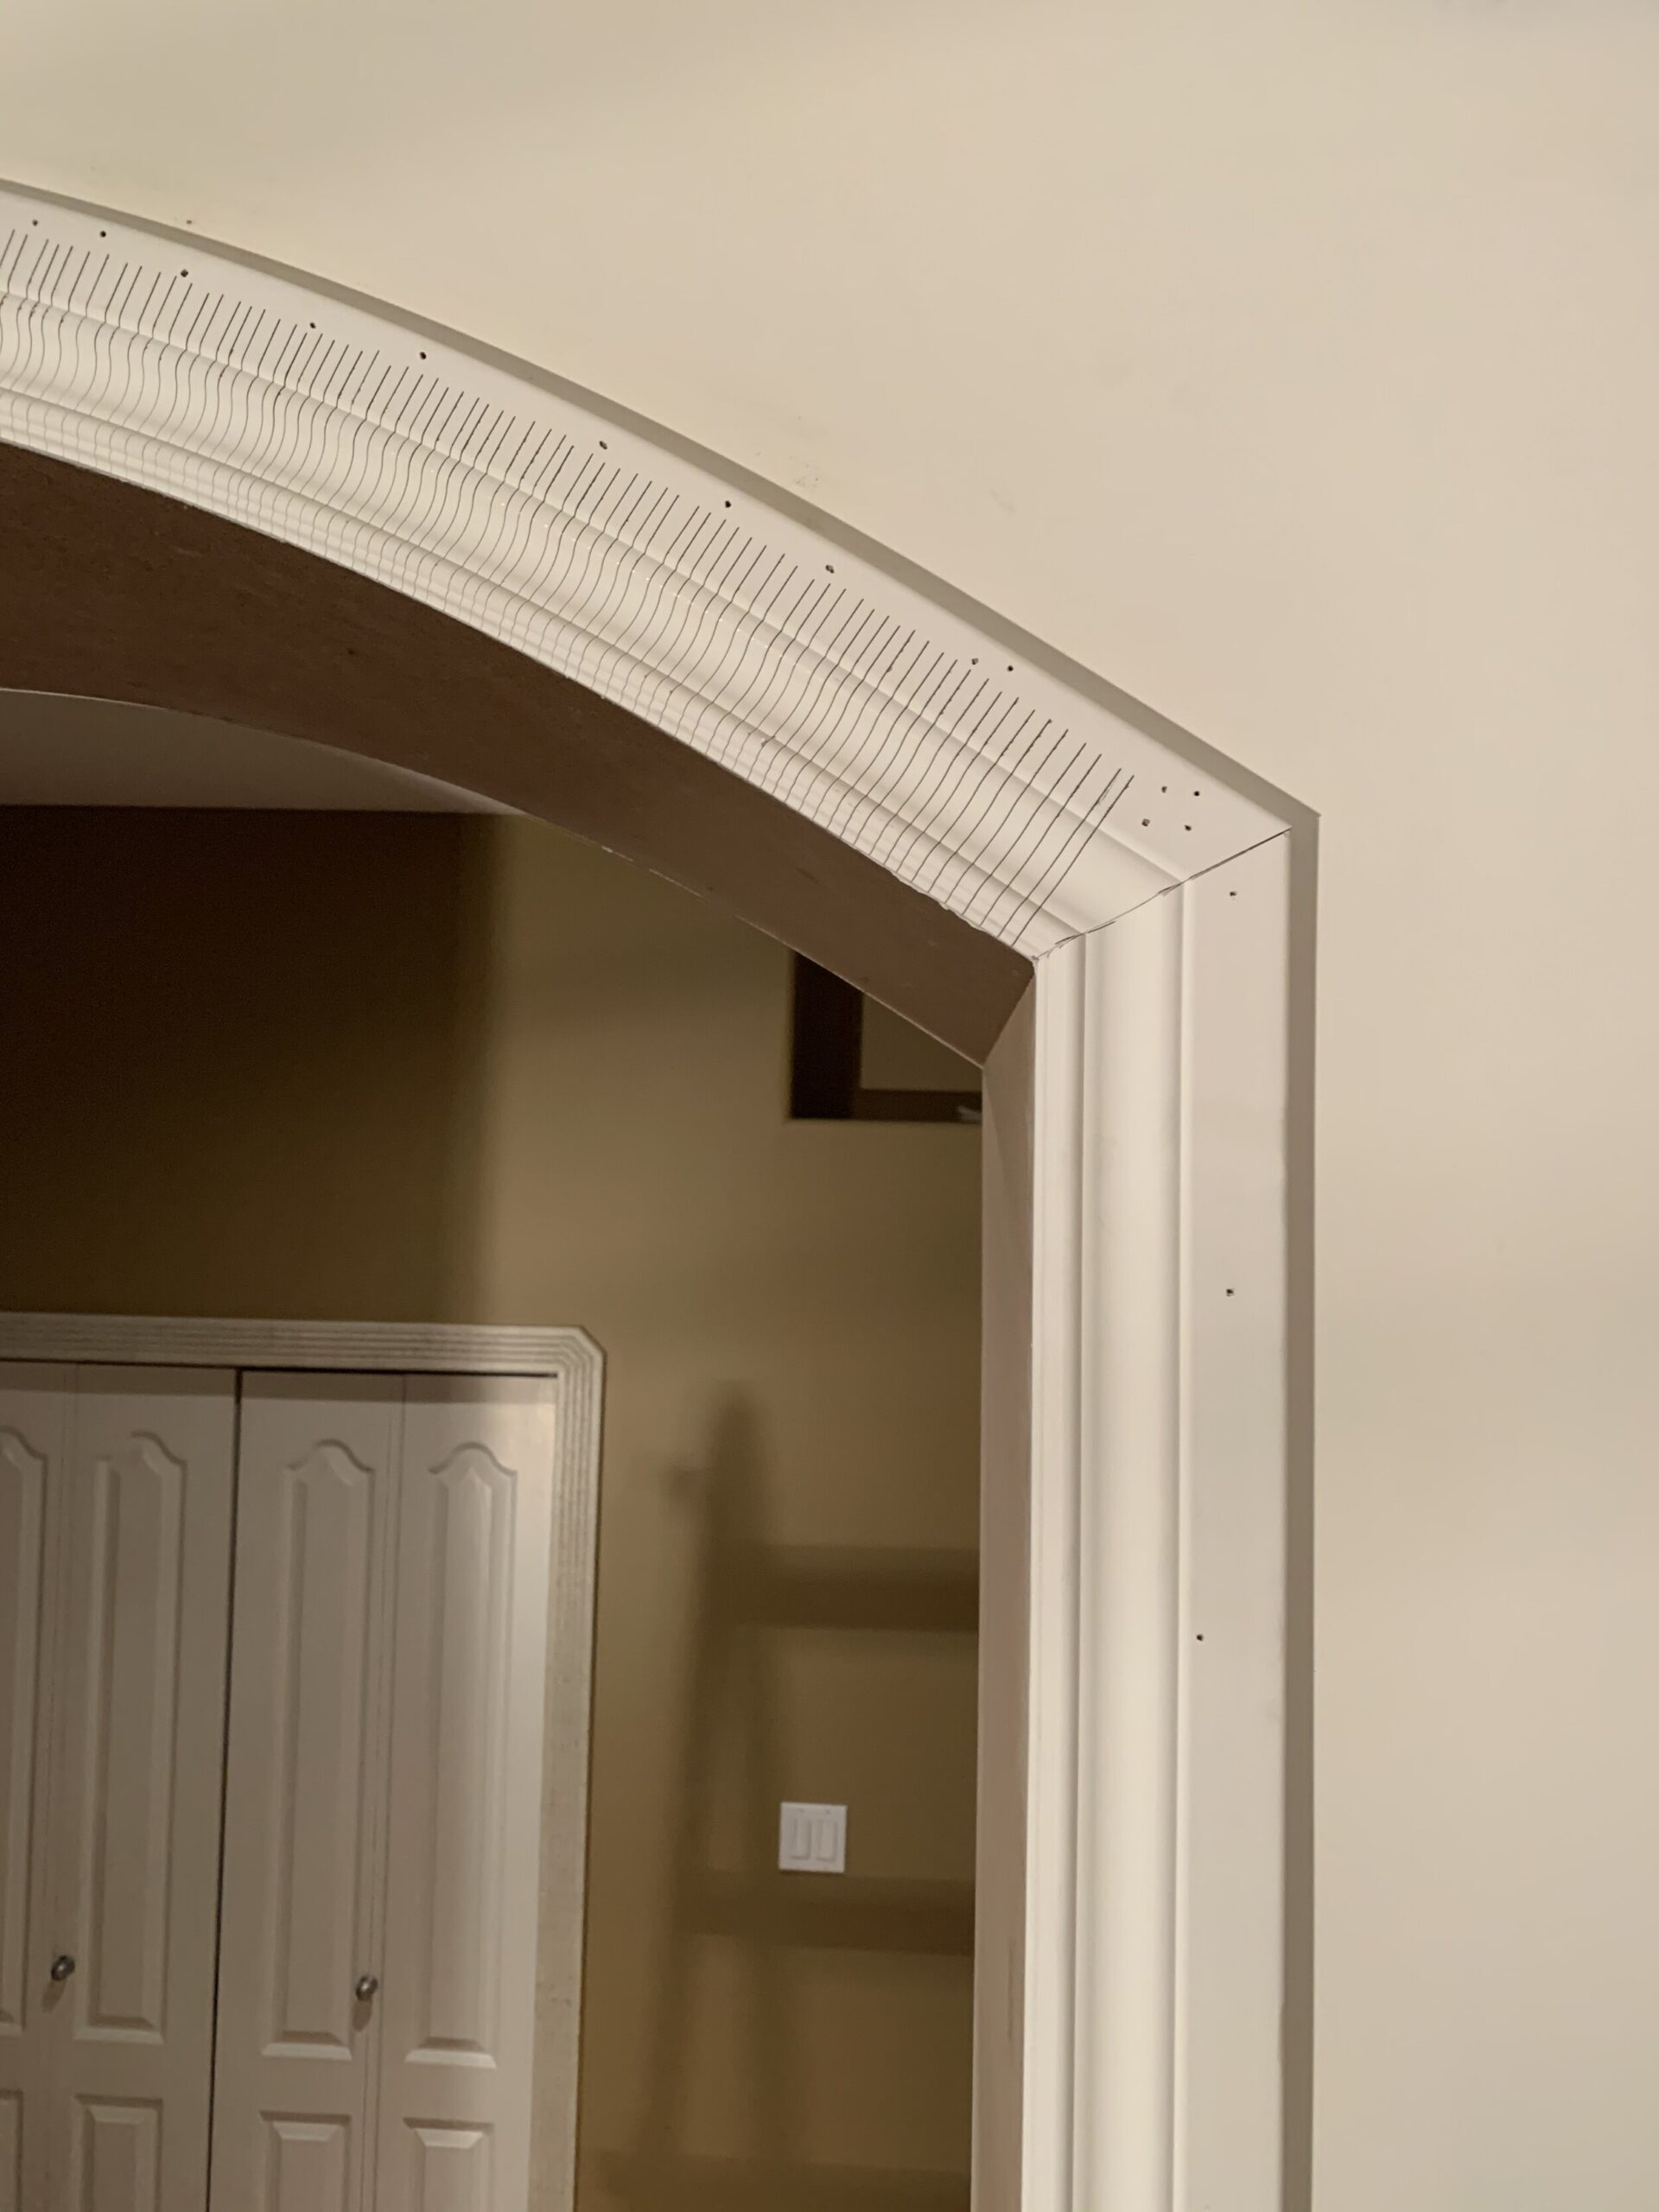 relief cuts on curved portion of trim on an arched doorway meeting up with the vertical trim at a mitered corner